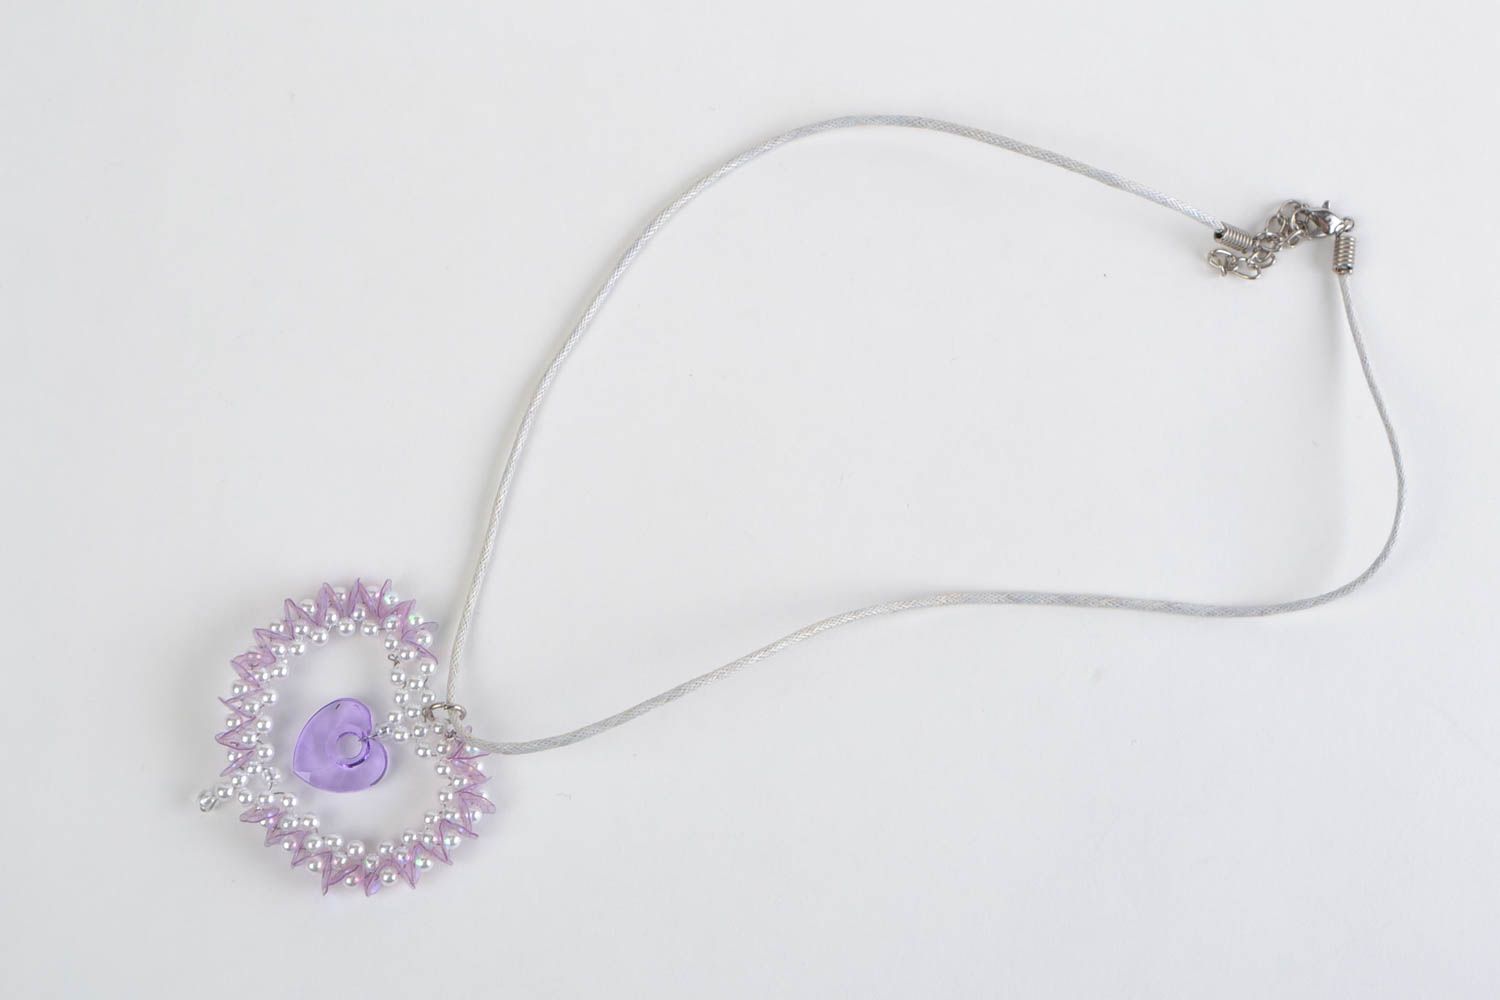 Handmade large pendant made of beads and sequins of lilac color on waxed cord photo 3